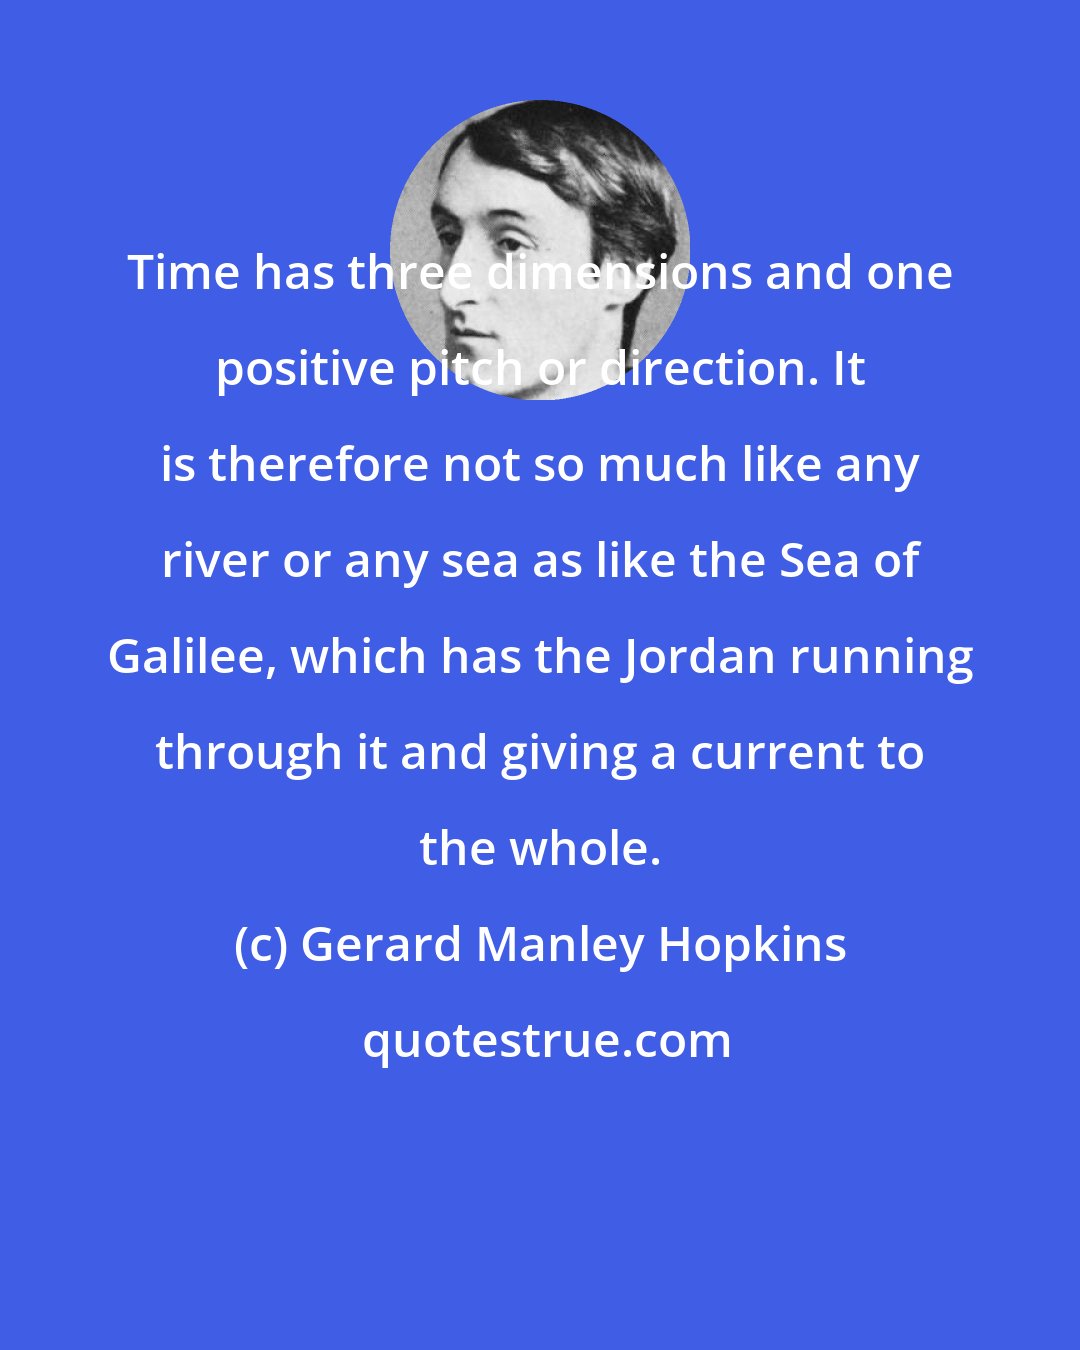 Gerard Manley Hopkins: Time has three dimensions and one positive pitch or direction. It is therefore not so much like any river or any sea as like the Sea of Galilee, which has the Jordan running through it and giving a current to the whole.